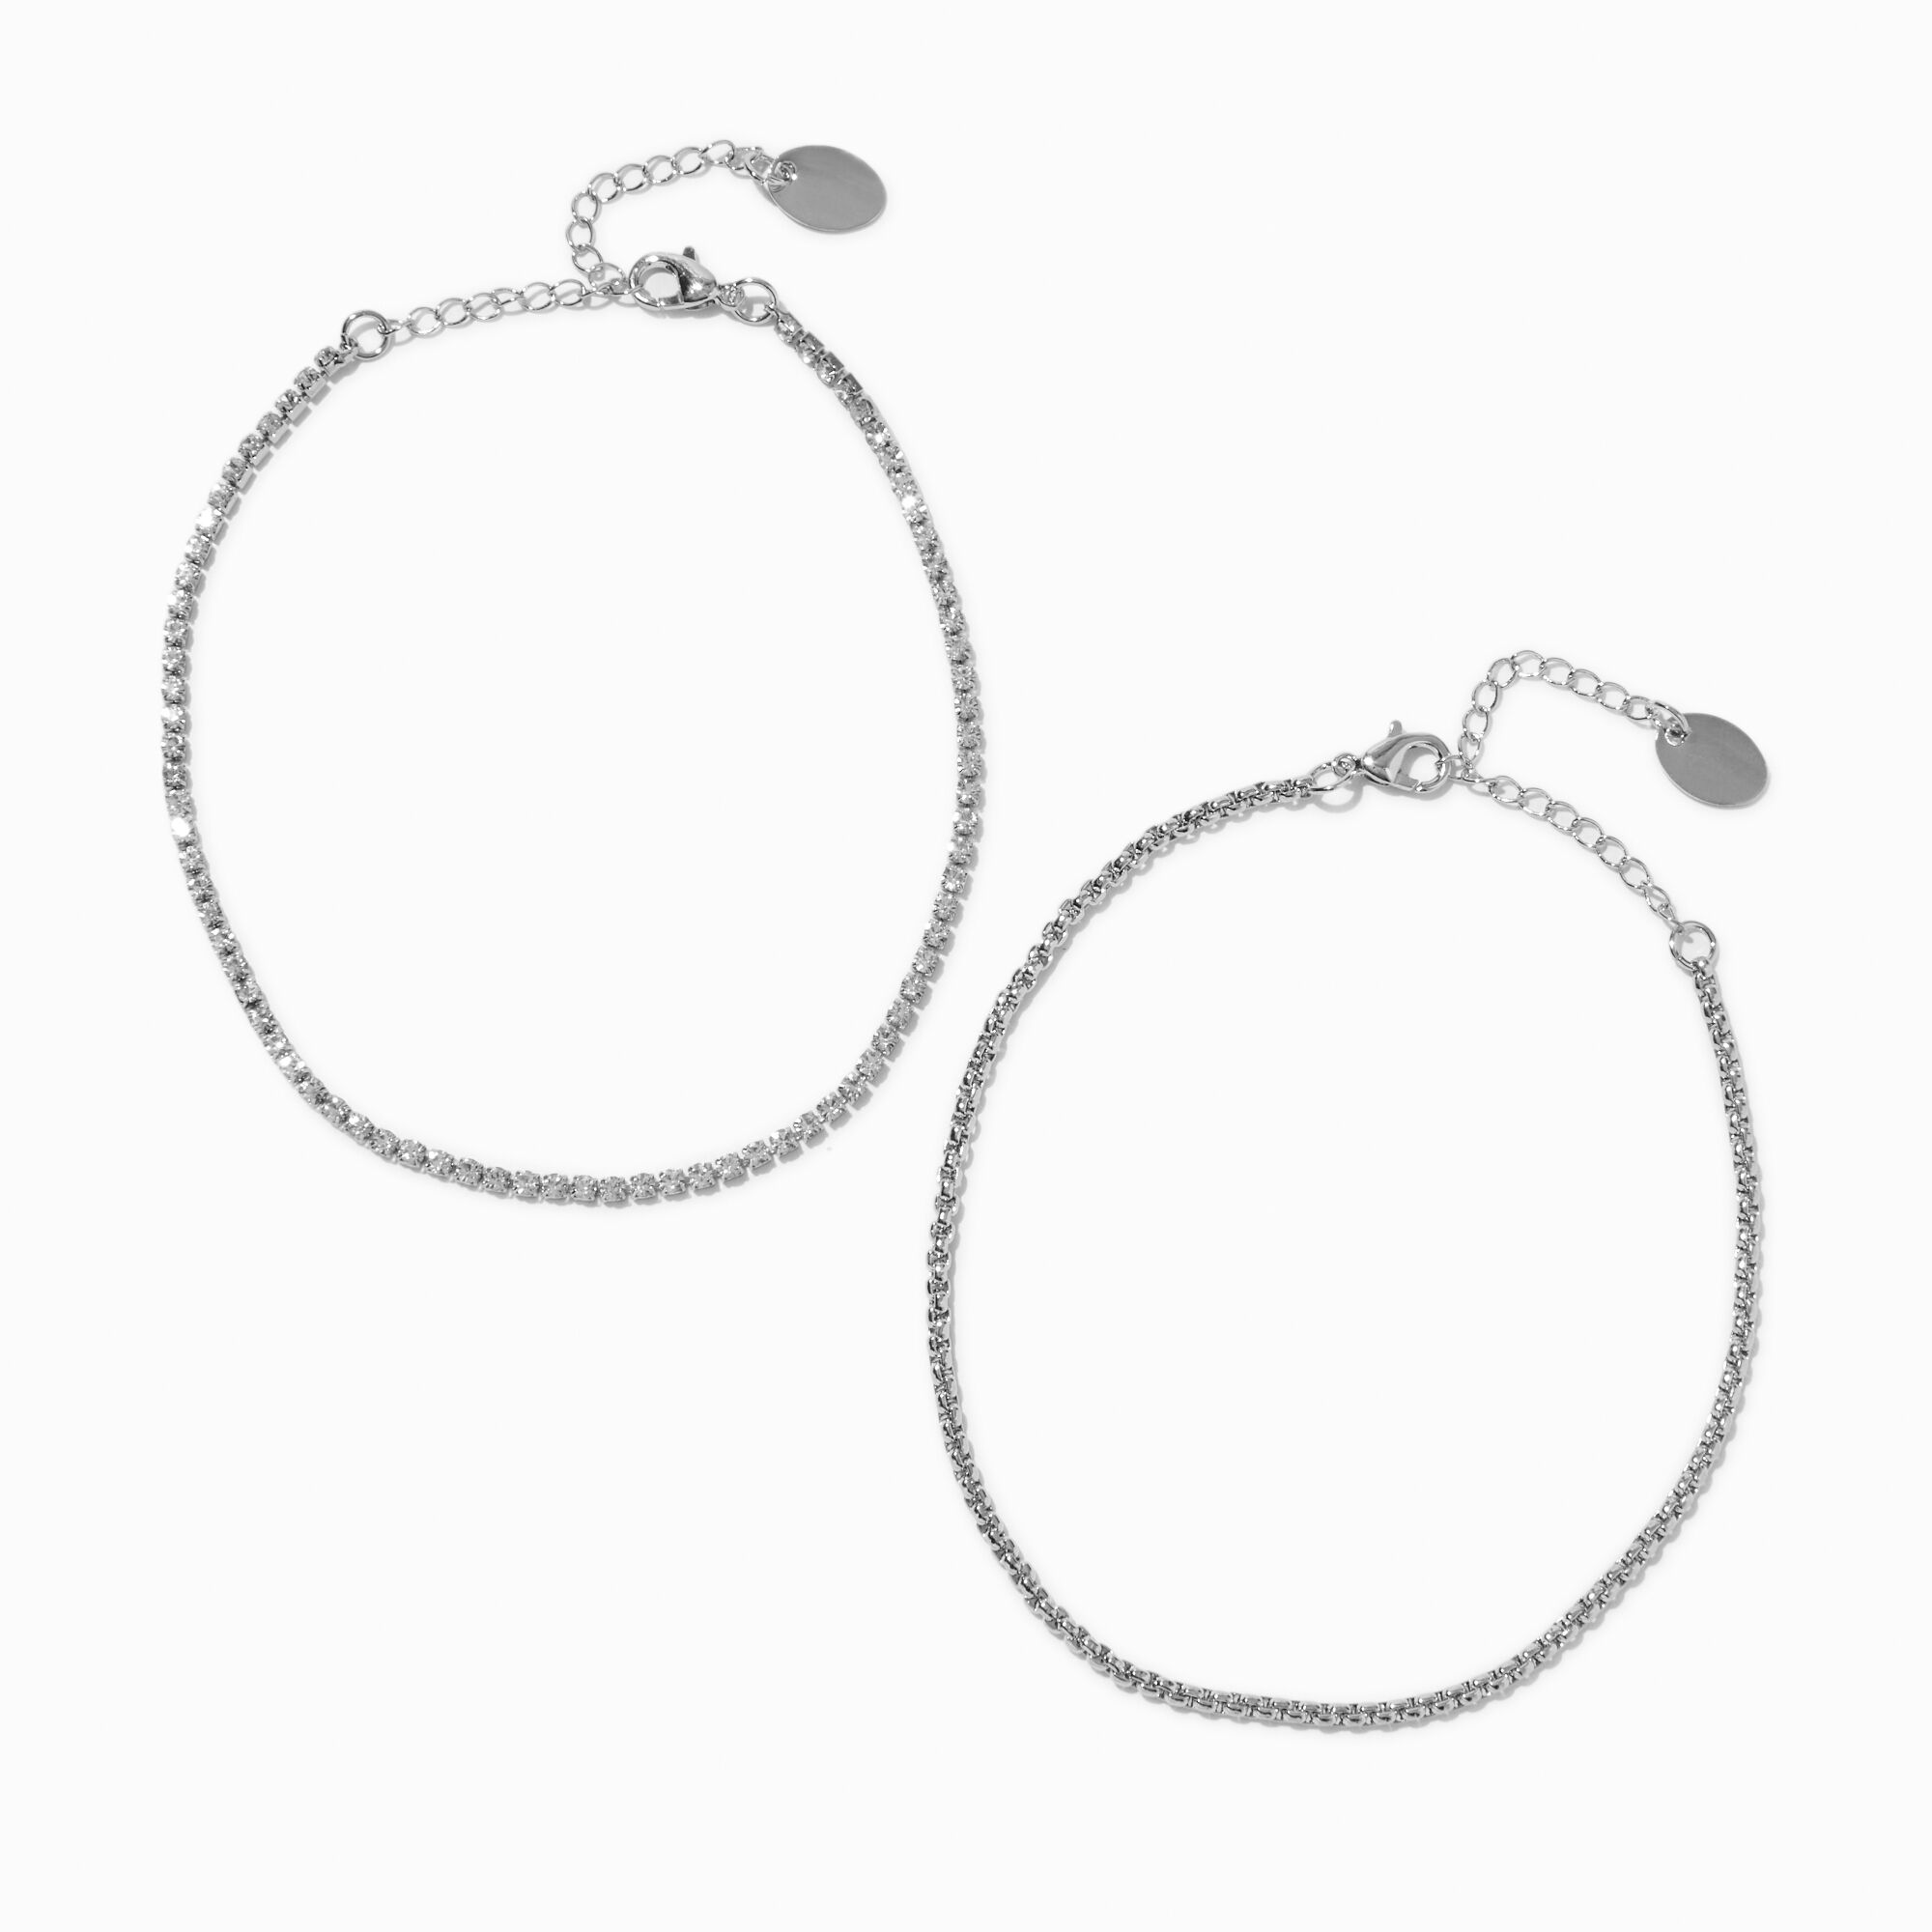 View Claires Tone Rhinestone Box Chain Anklets 2 Pack Silver information